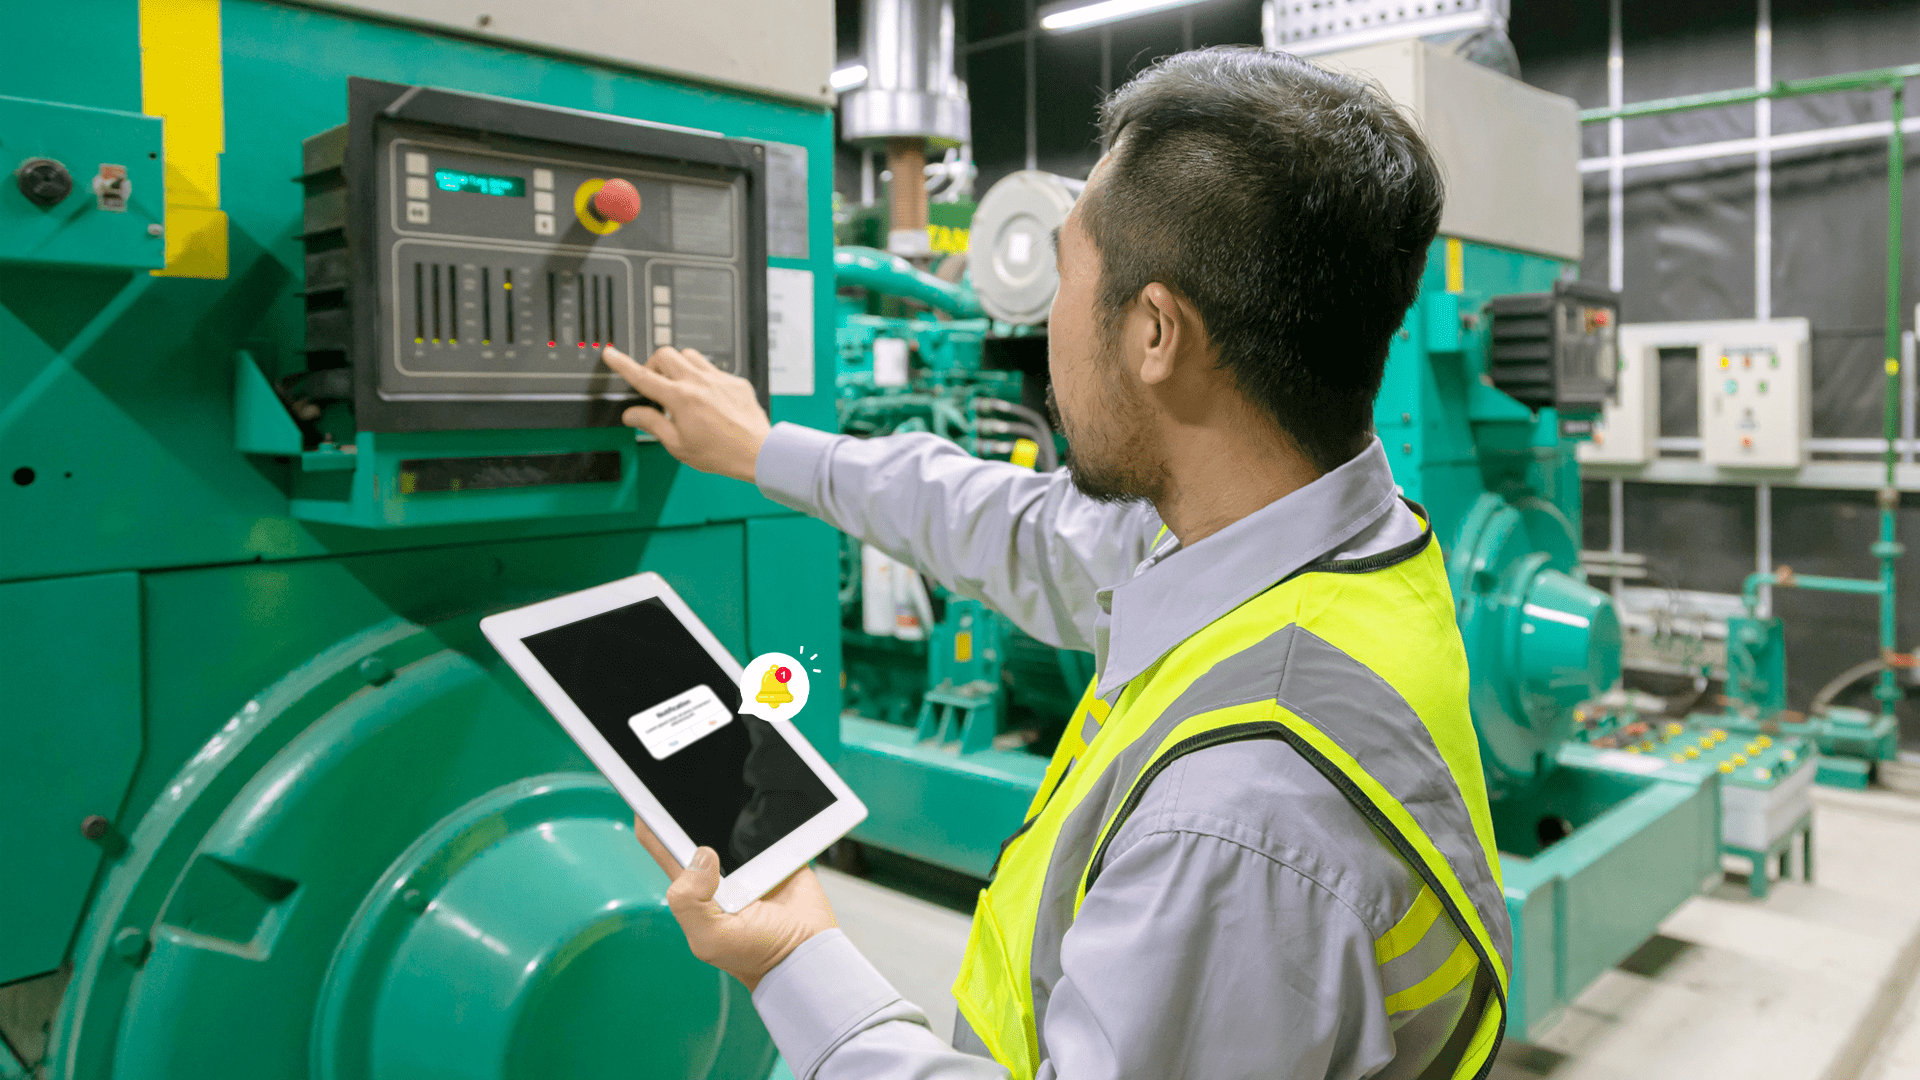 IoT Smart Manufacturing Use Case 2.2